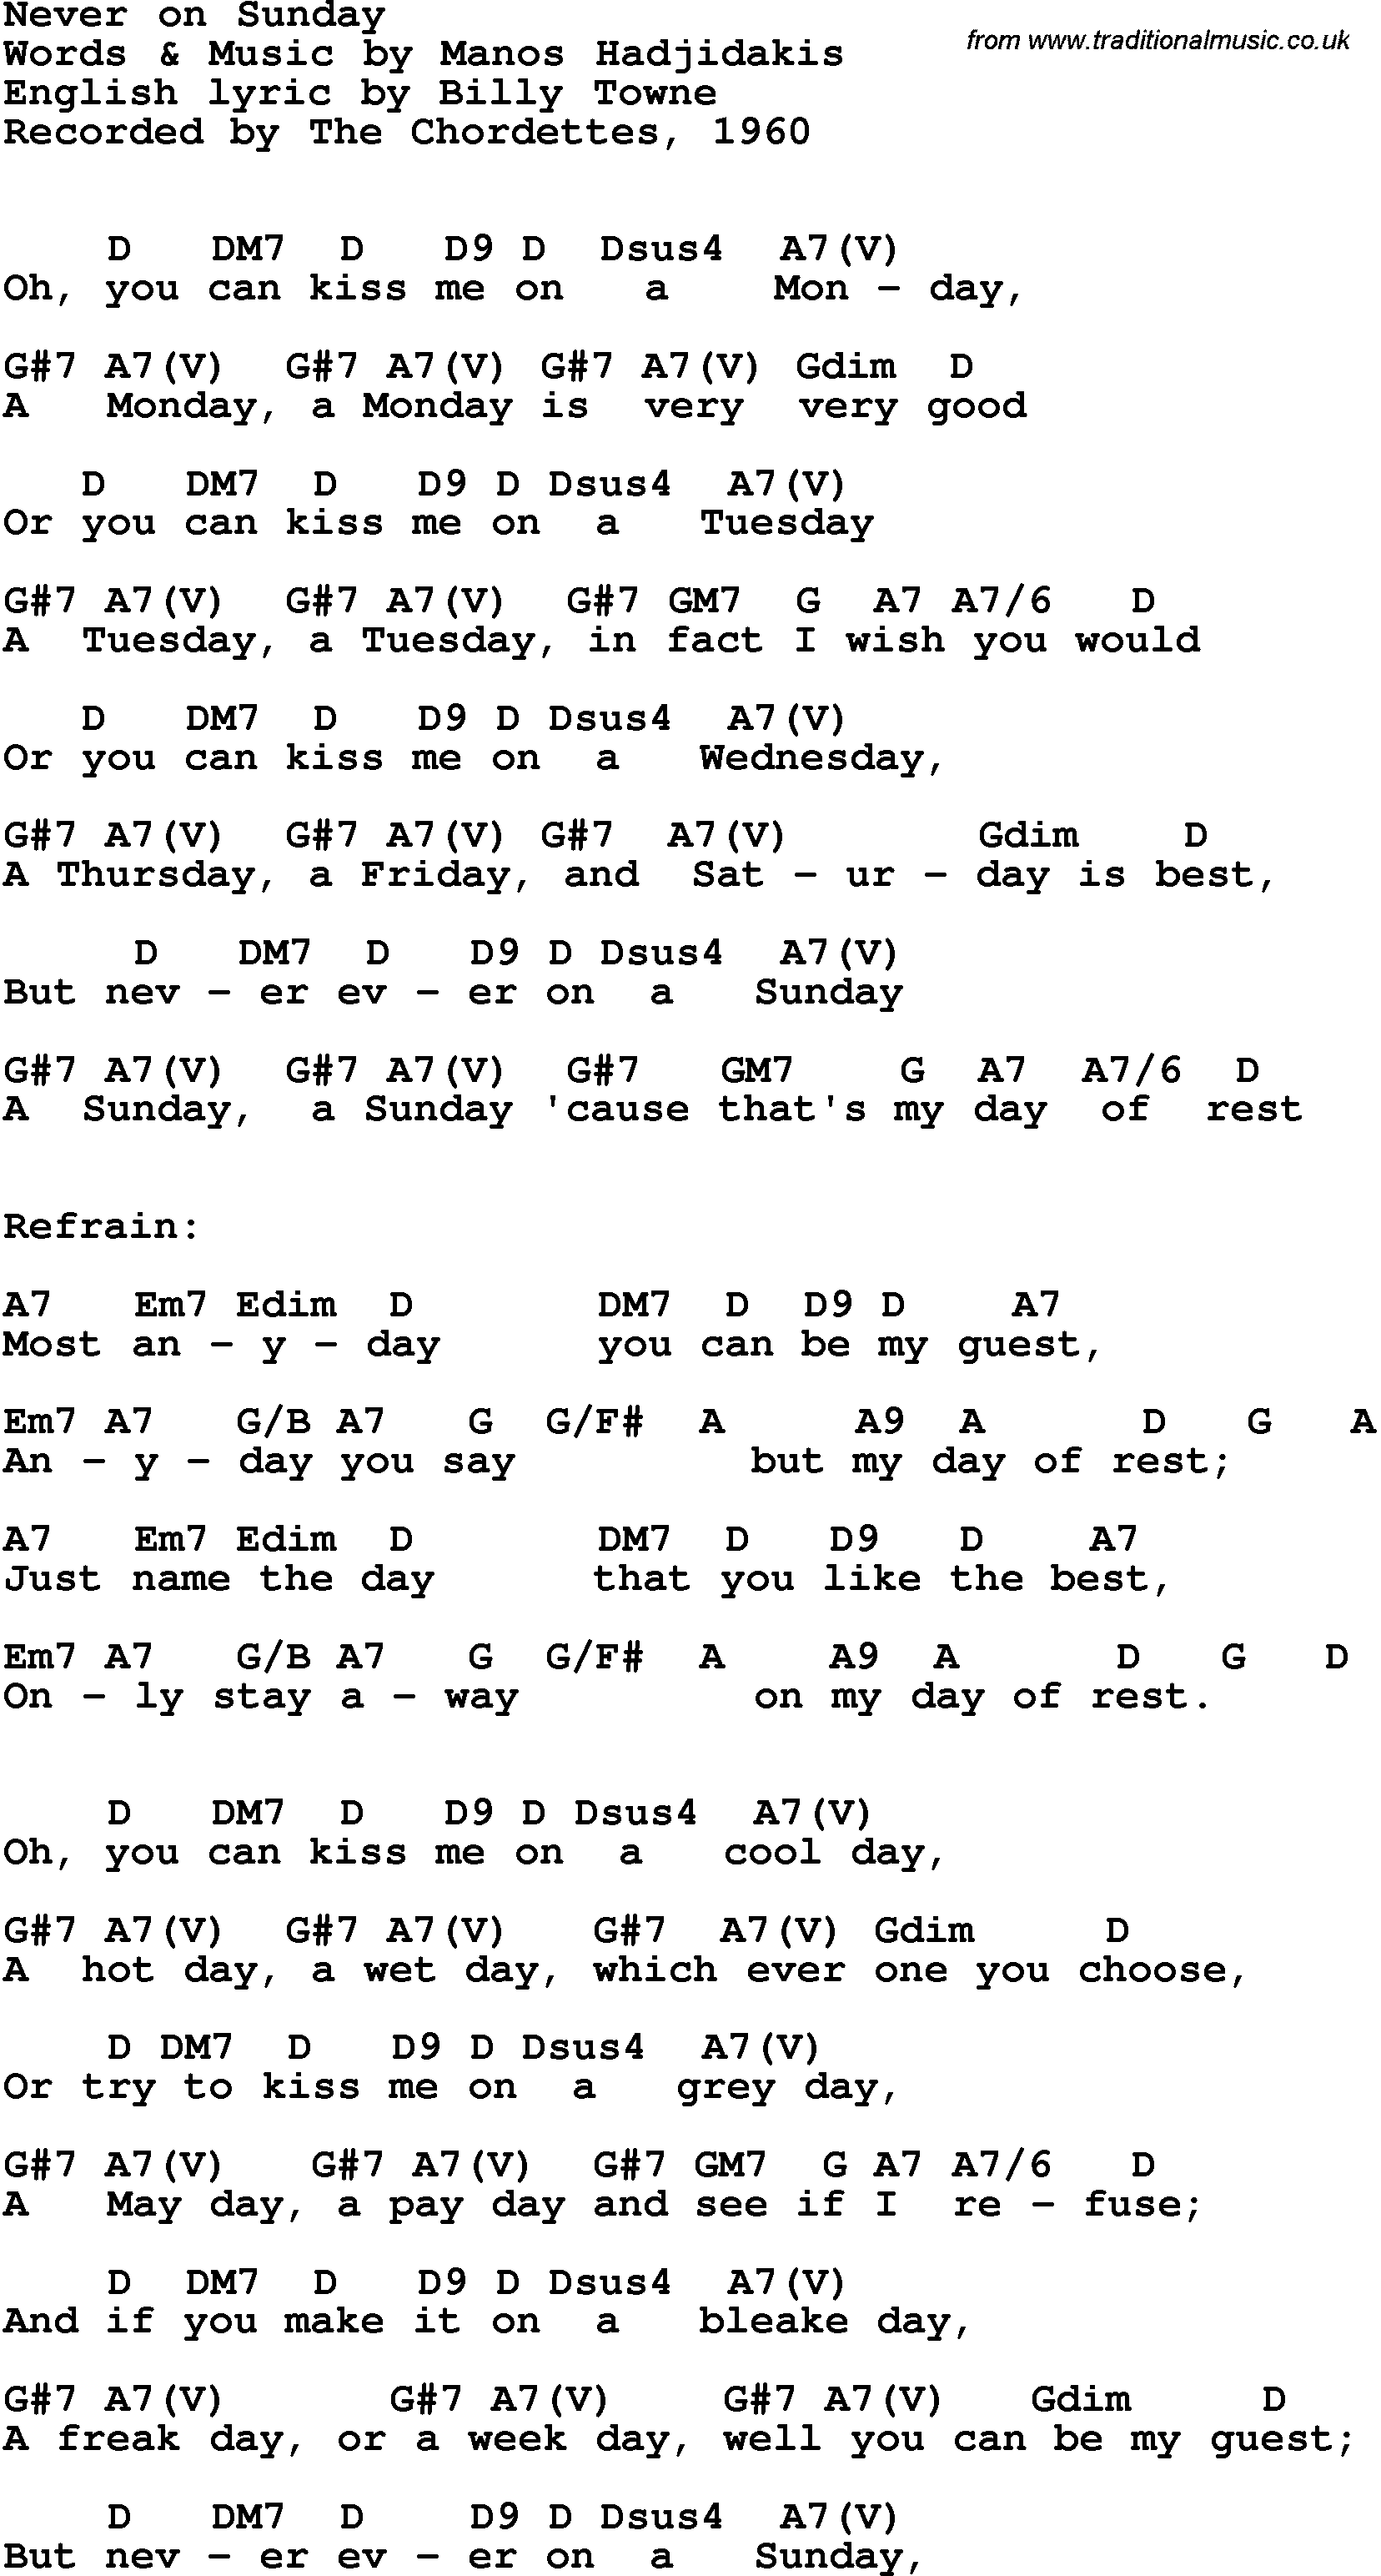 Song Lyrics with guitar chords for Never On Sunday - The Chordettes, 1960